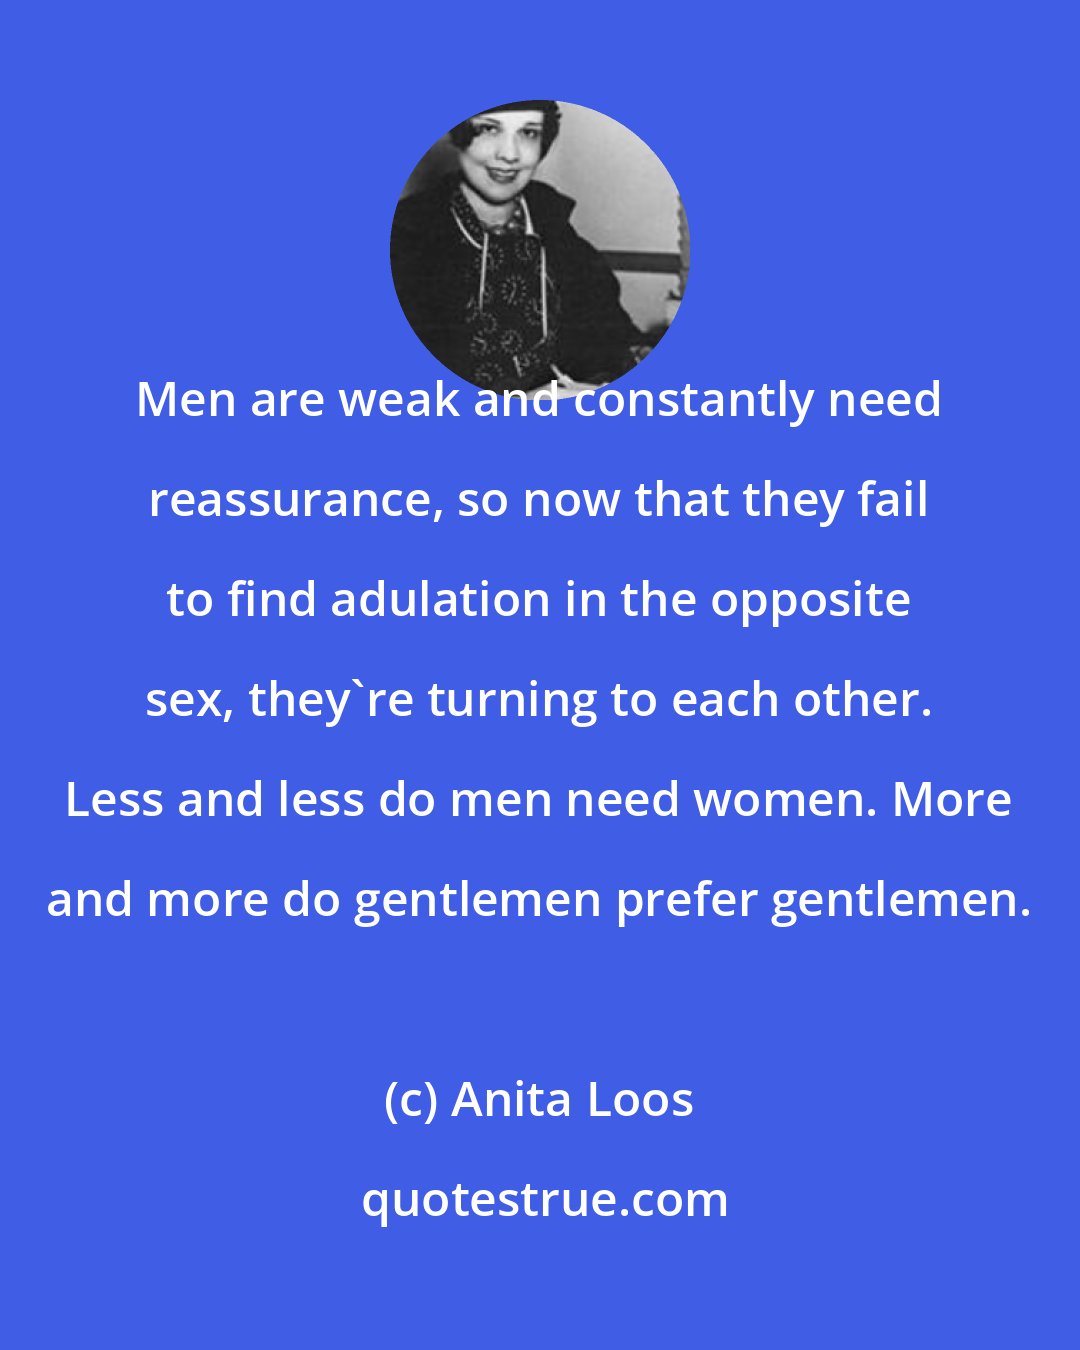 Anita Loos: Men are weak and constantly need reassurance, so now that they fail to find adulation in the opposite sex, they're turning to each other. Less and less do men need women. More and more do gentlemen prefer gentlemen.